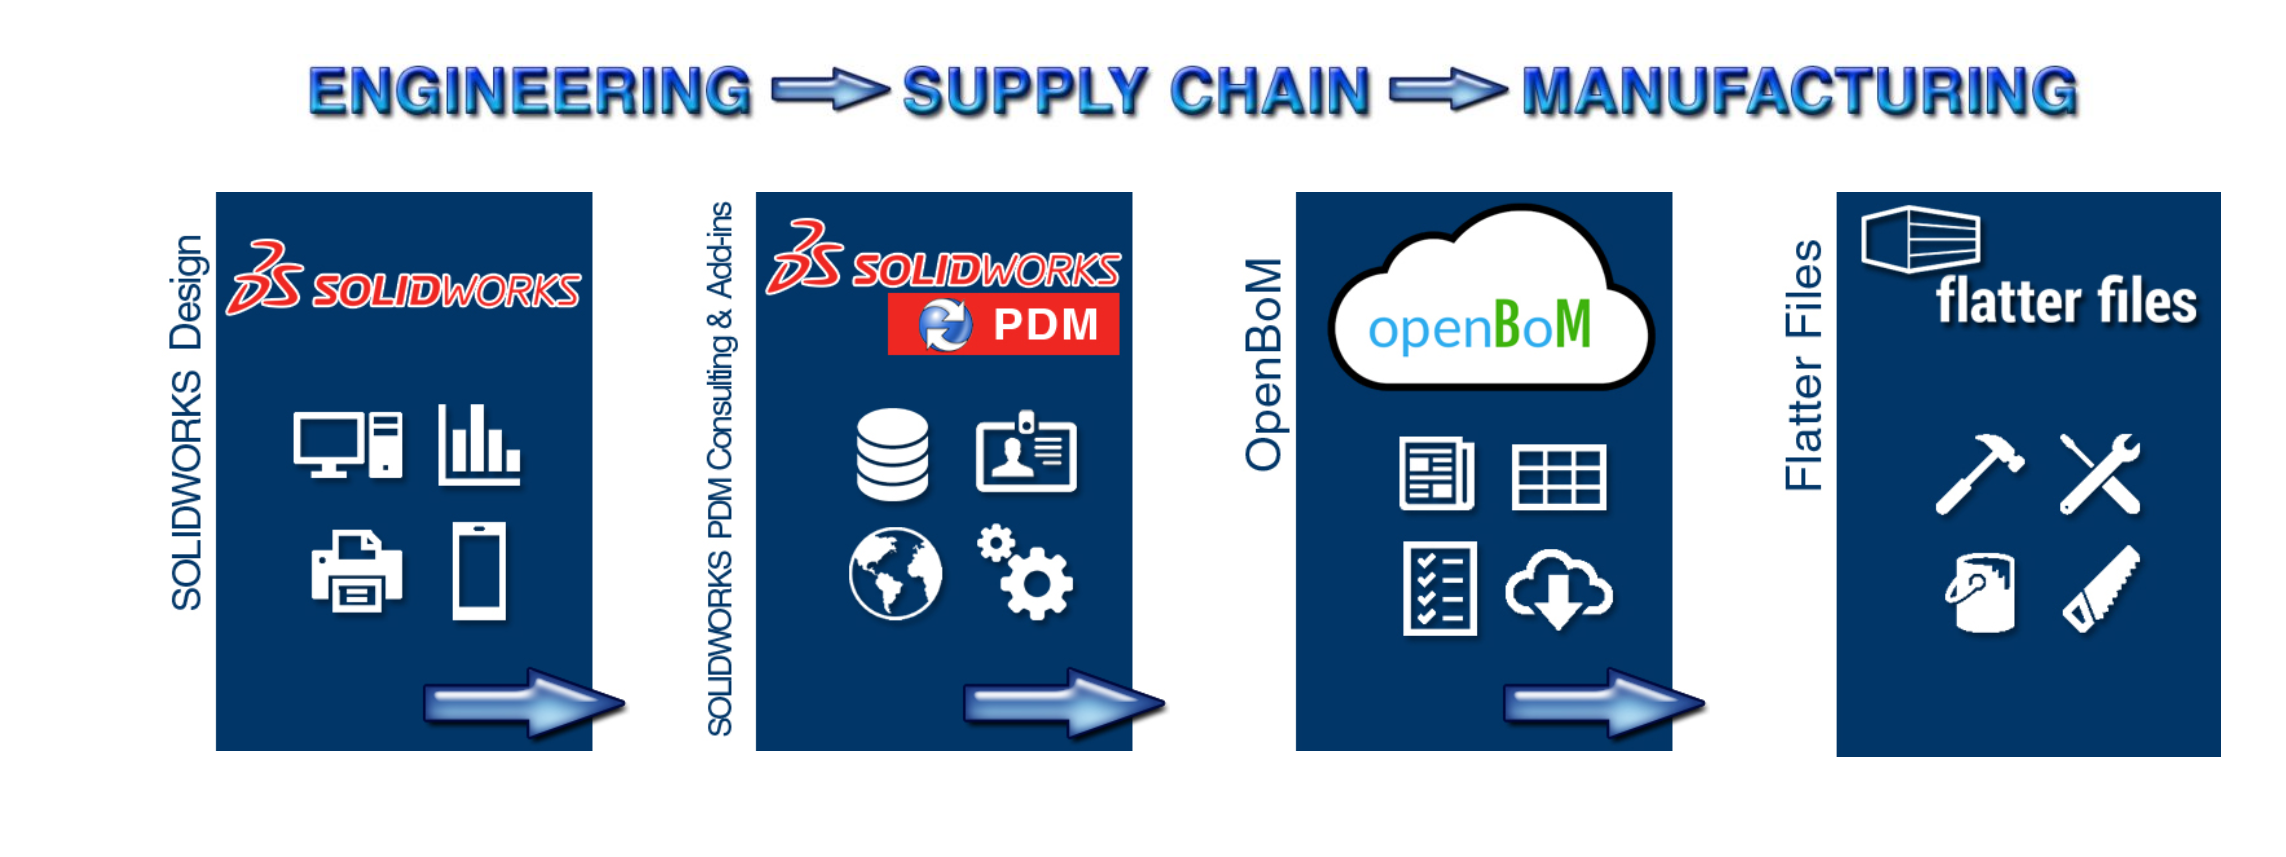 engineering-supply-chain-manufacturing